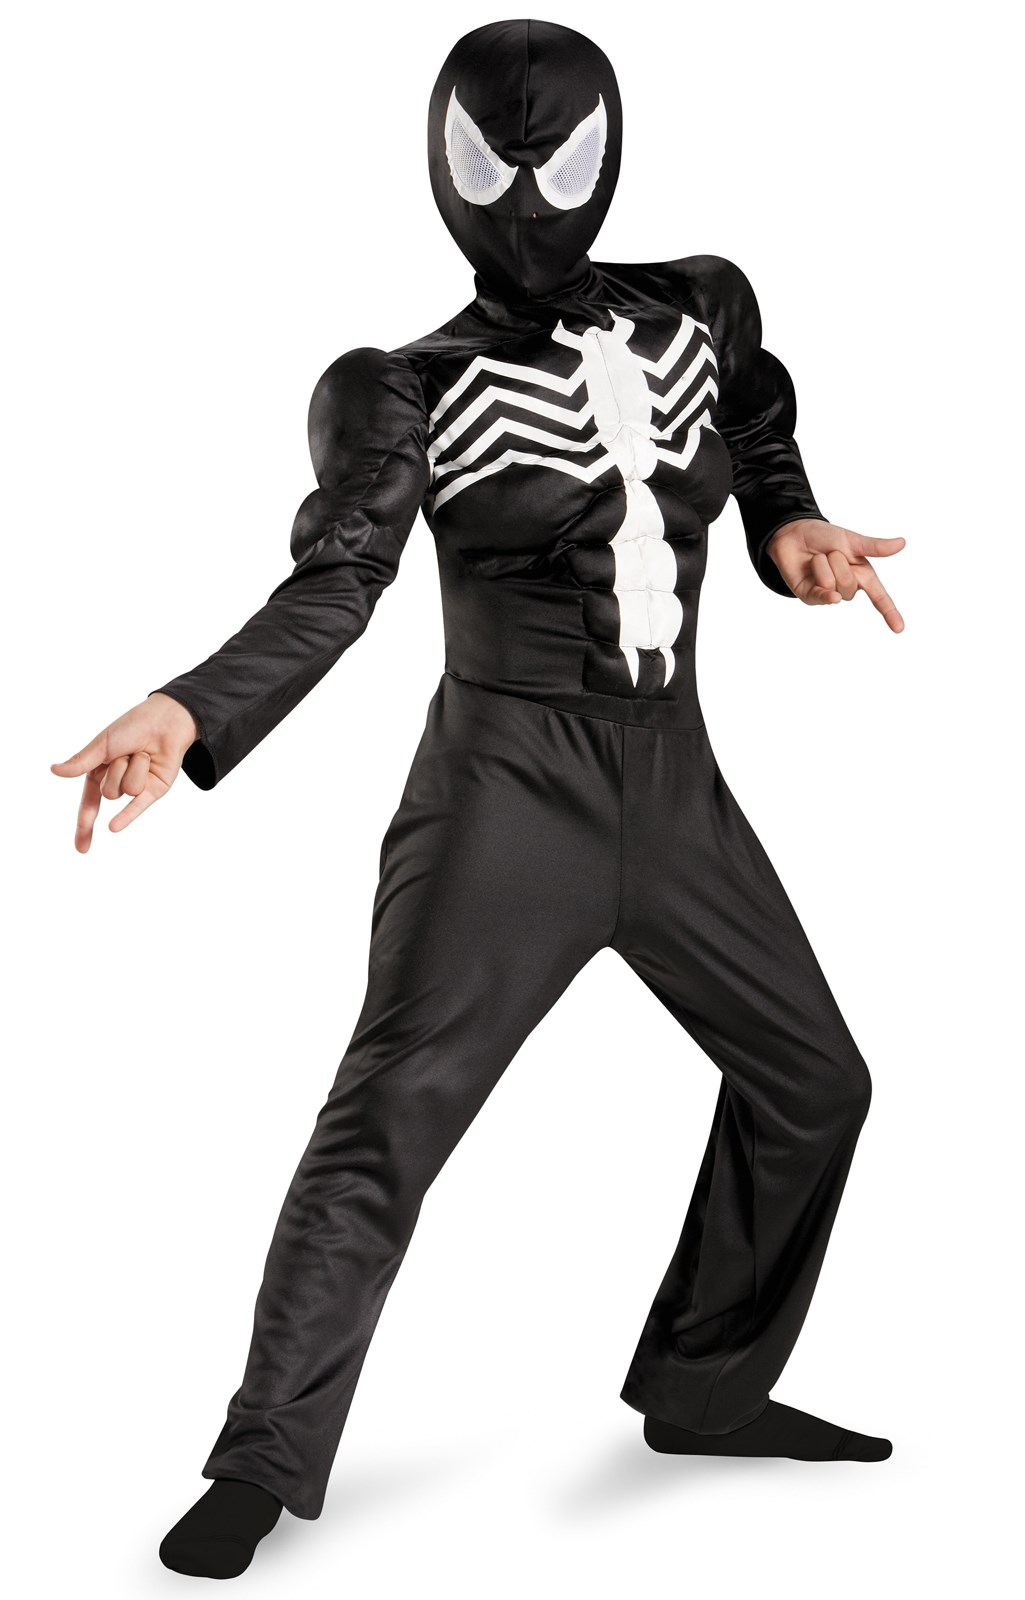 Ultimate Black Suited Spider-Man Muscle Child Costume